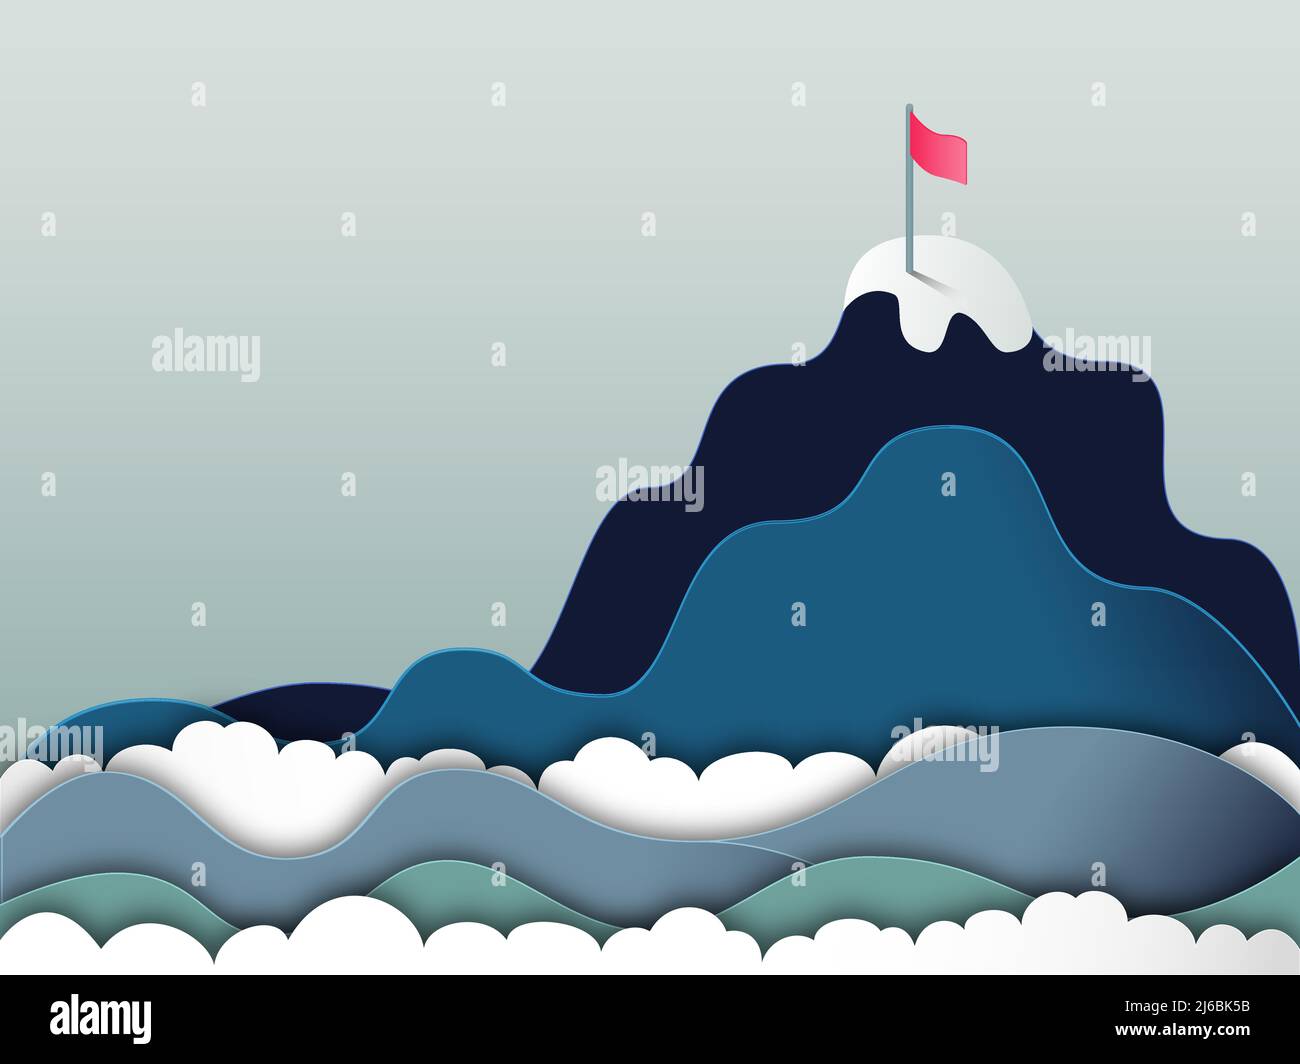 Paper cut style vector illustration of mountain peak with red flag. Concept of business success and achievement. Background illustration in blue and g Stock Vector